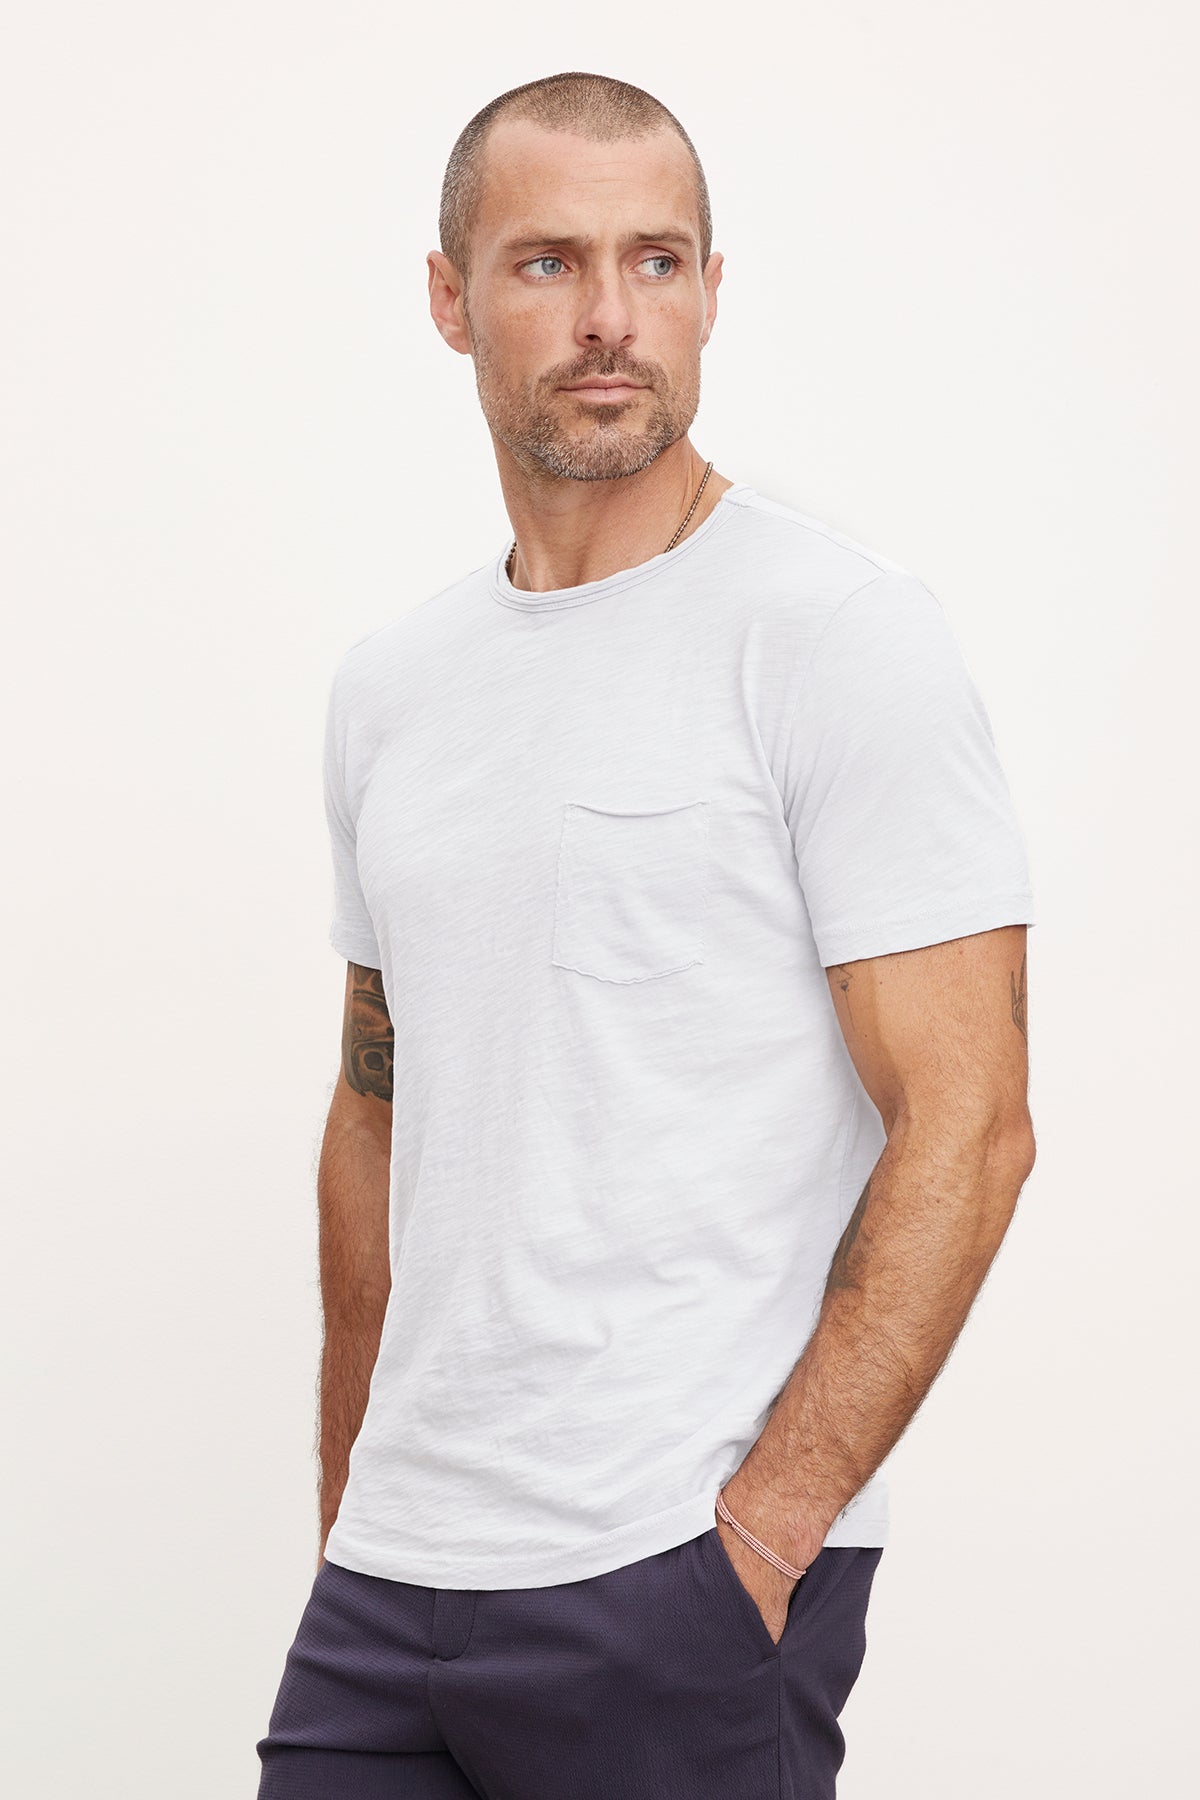   A man with a beard and tattoos, wearing a white textured cotton slub CHAD TEE by Velvet by Graham & Spencer and navy trousers, stands with a serious expression looking to his left. 